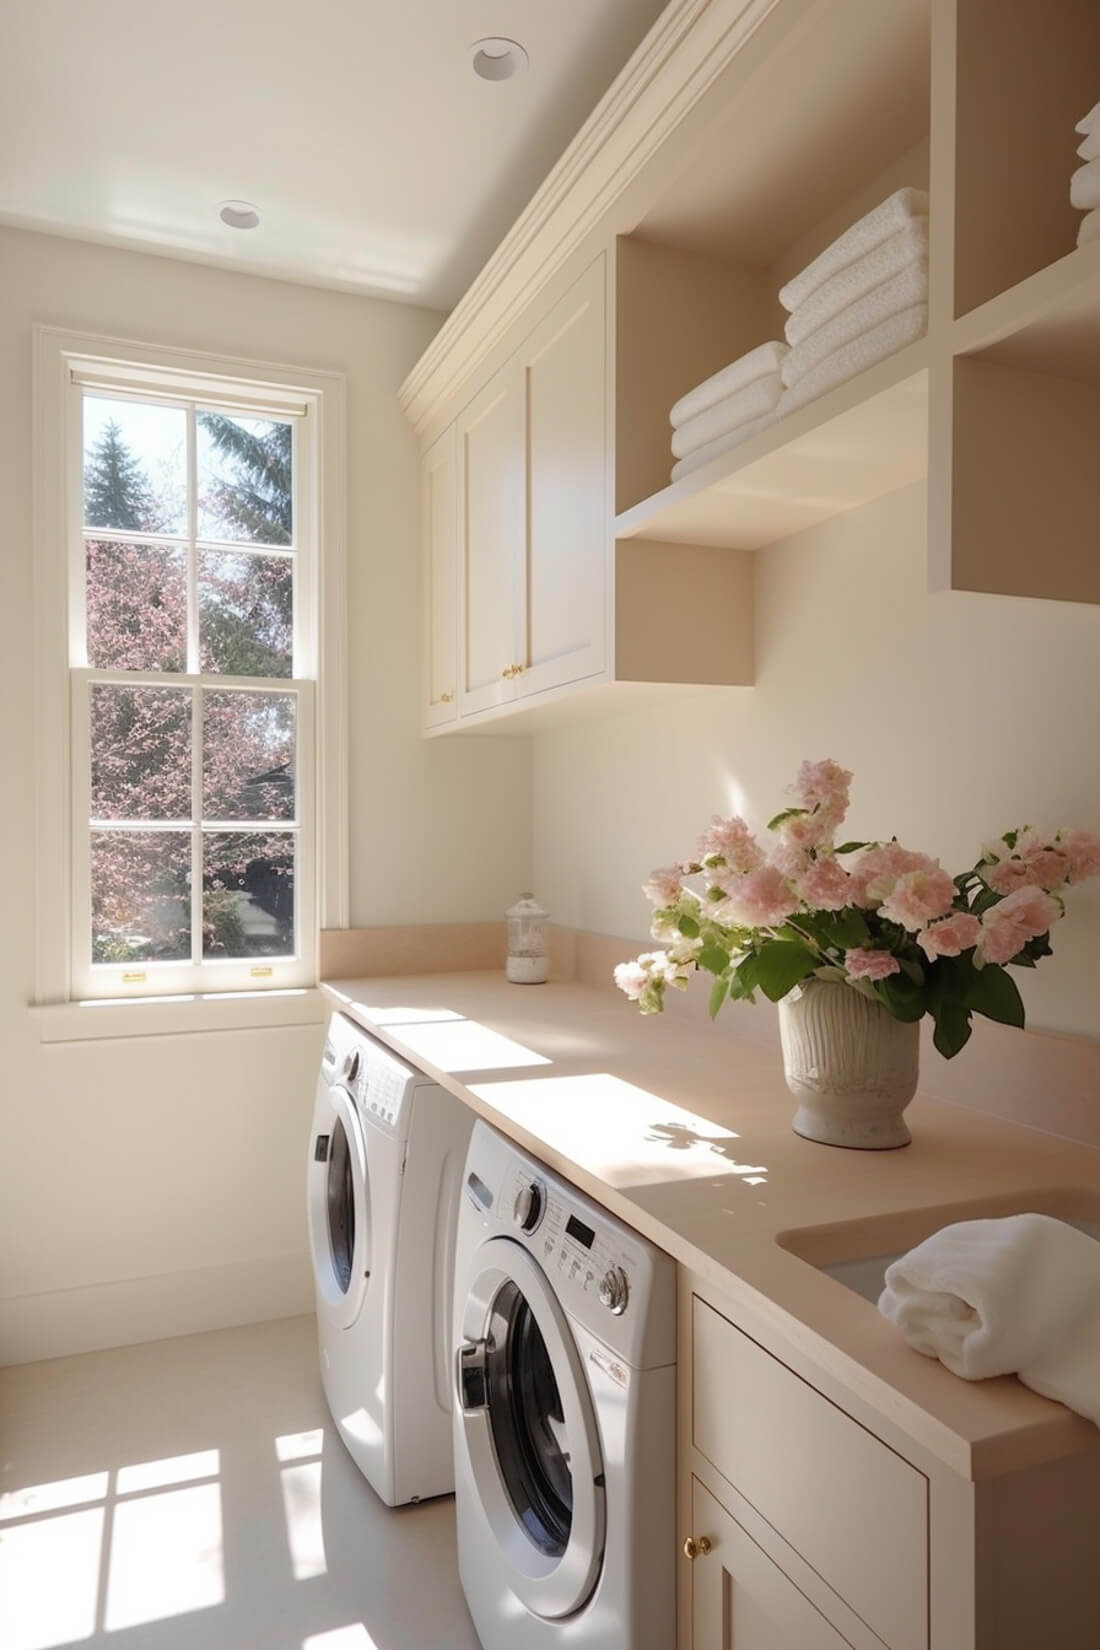 cream and pink laundry room with cabinets and open shelf with towels above, and space for a hanging rod